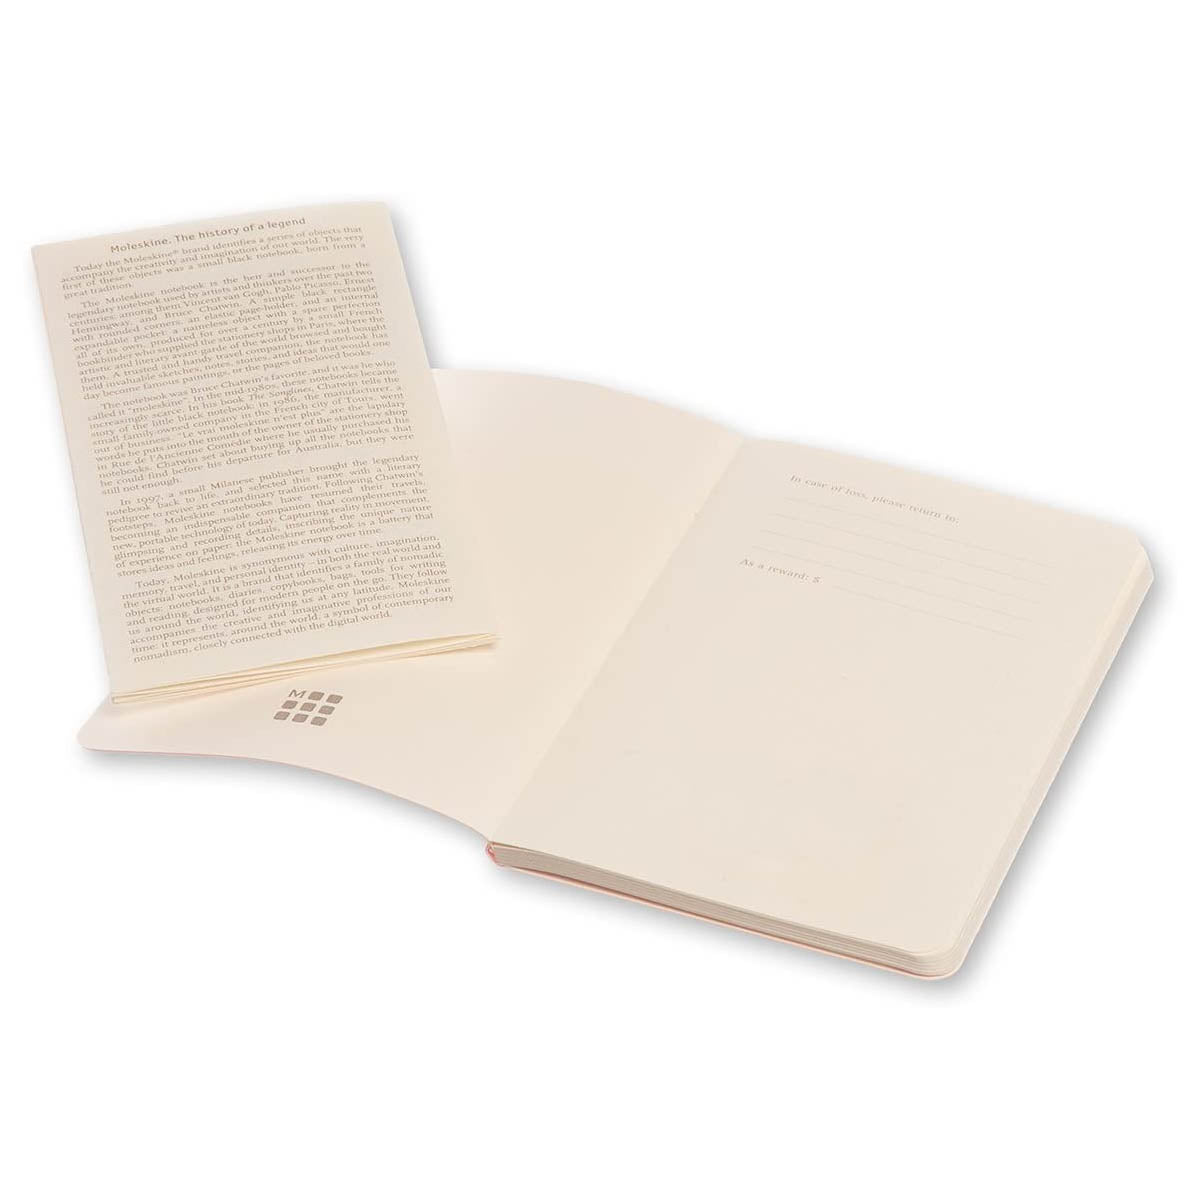 Moleskine Volant Set 2 Cahiers Pages Blanches Jaune